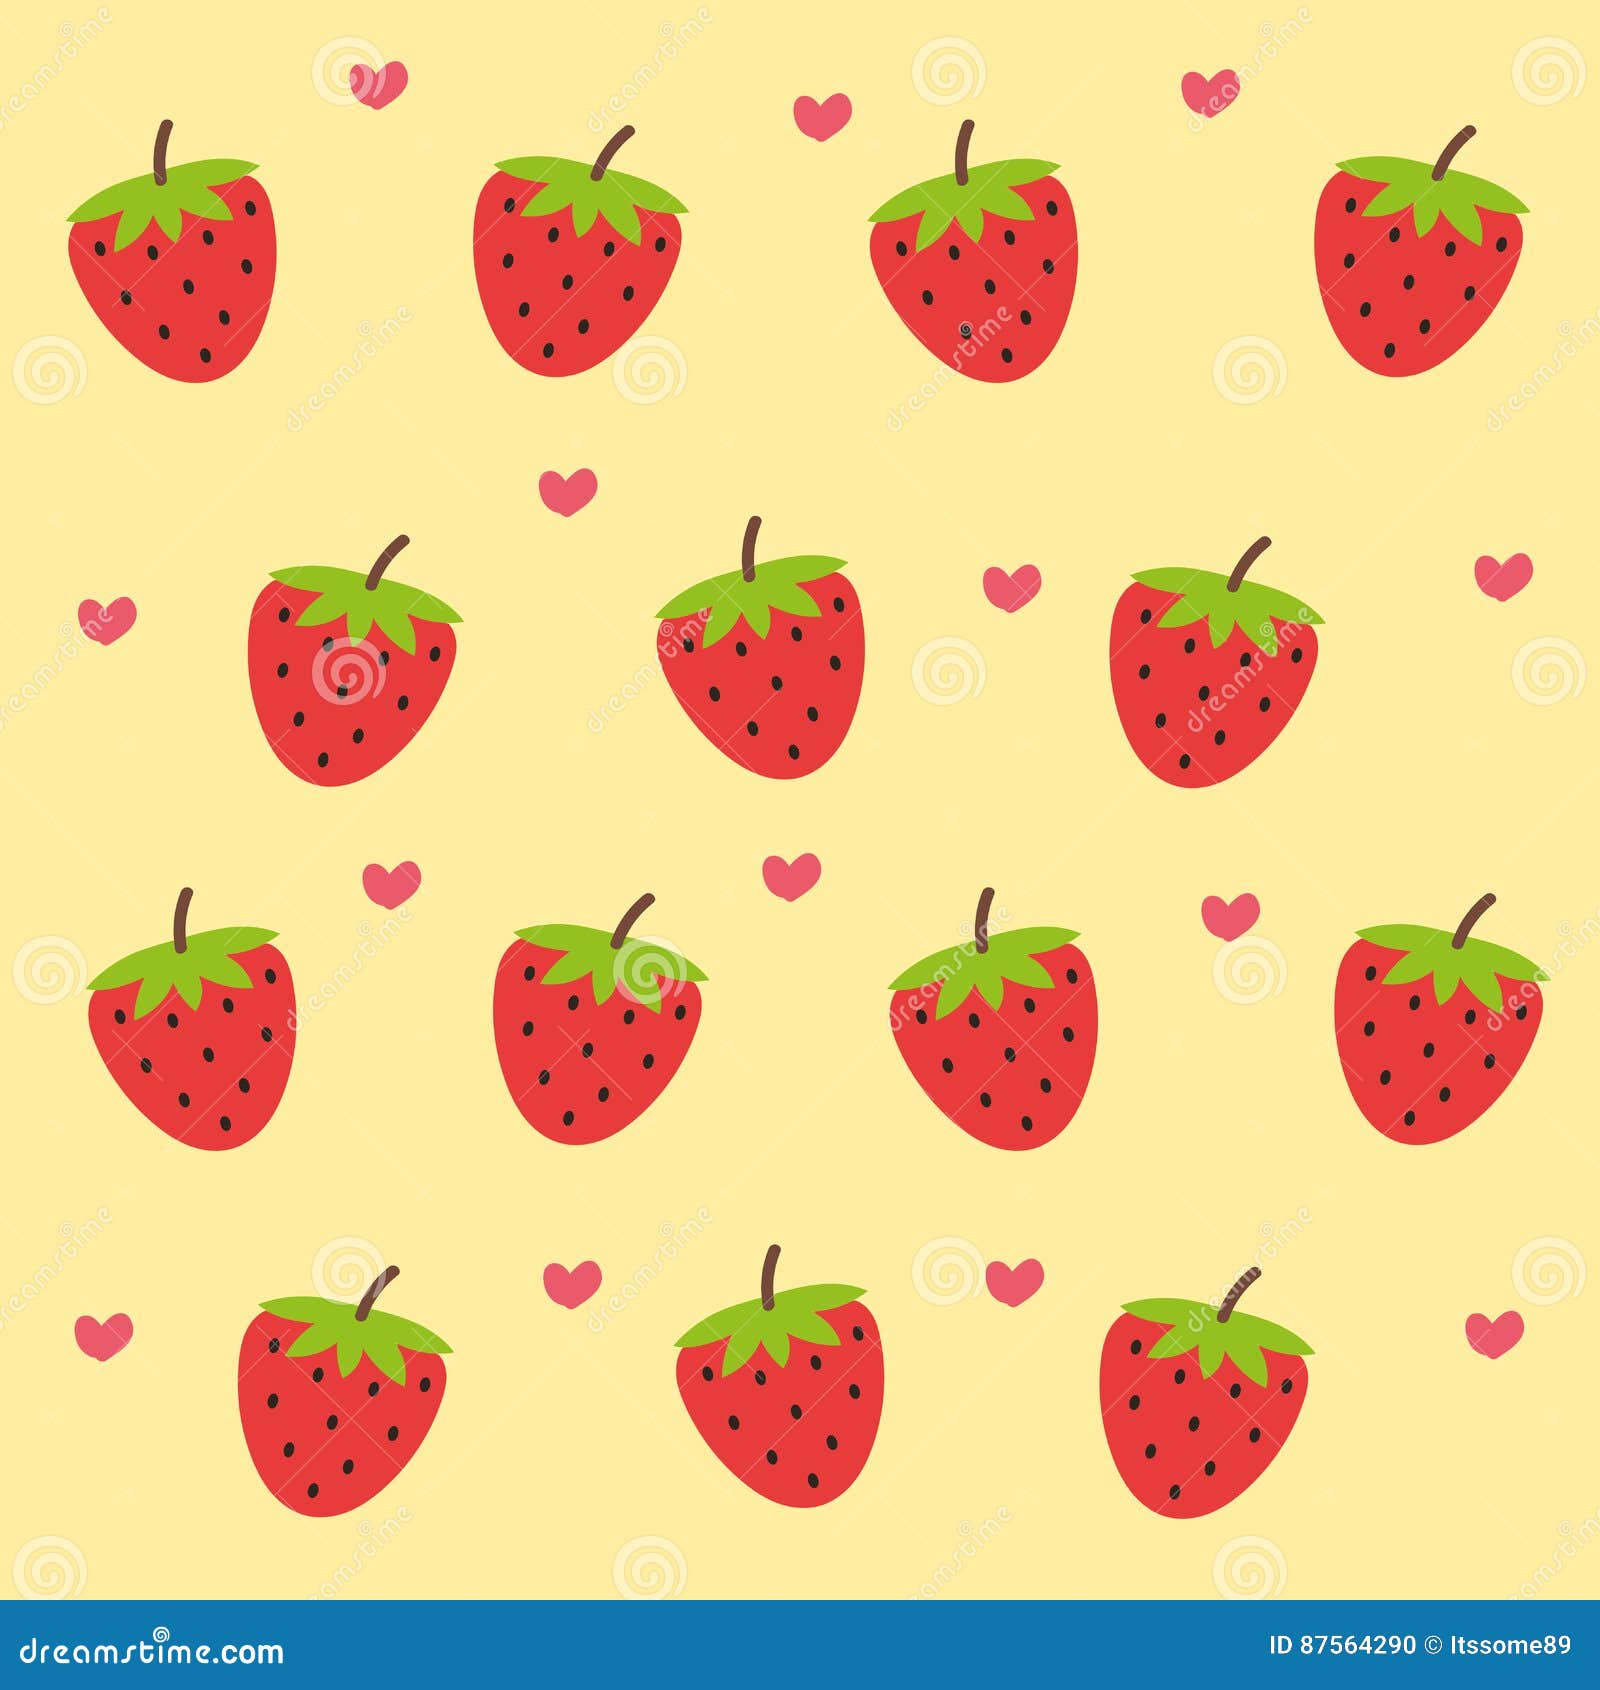  Be Positive   STRAWBERRY WALLPAPERS I will edit and convert the